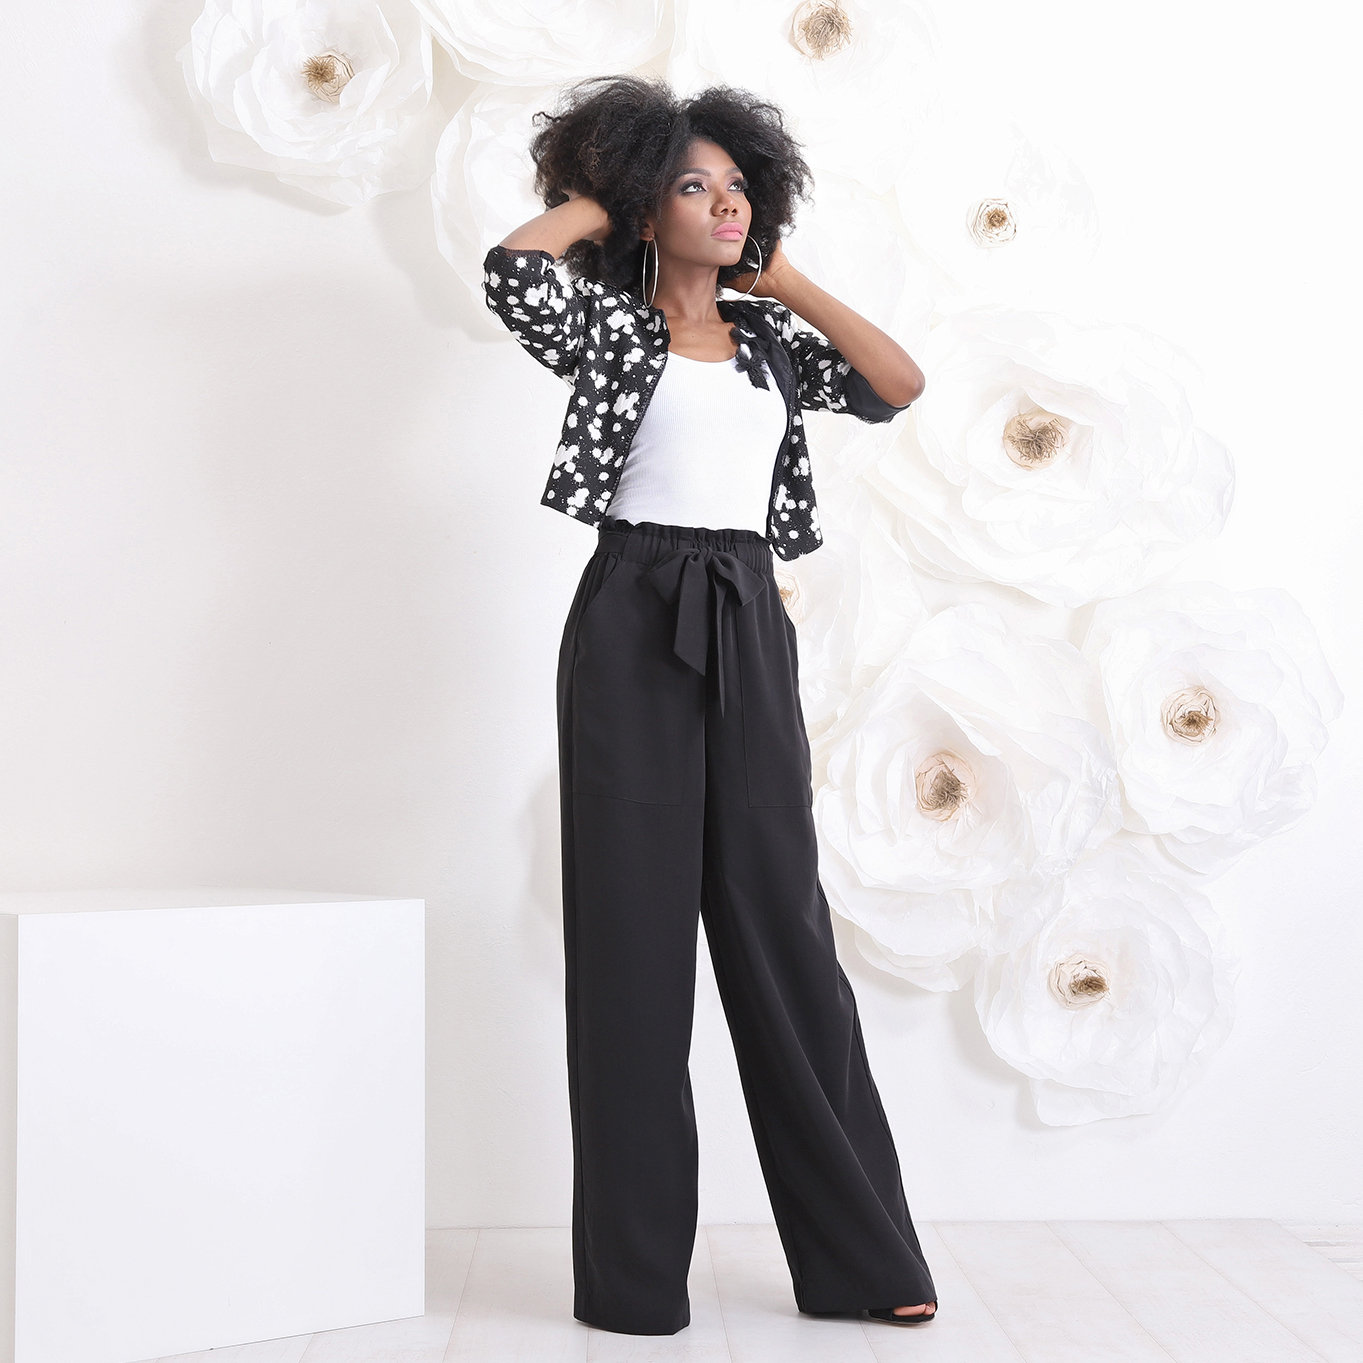 Buy Black High Rise Tie Up Palazzo Pants for Women Online